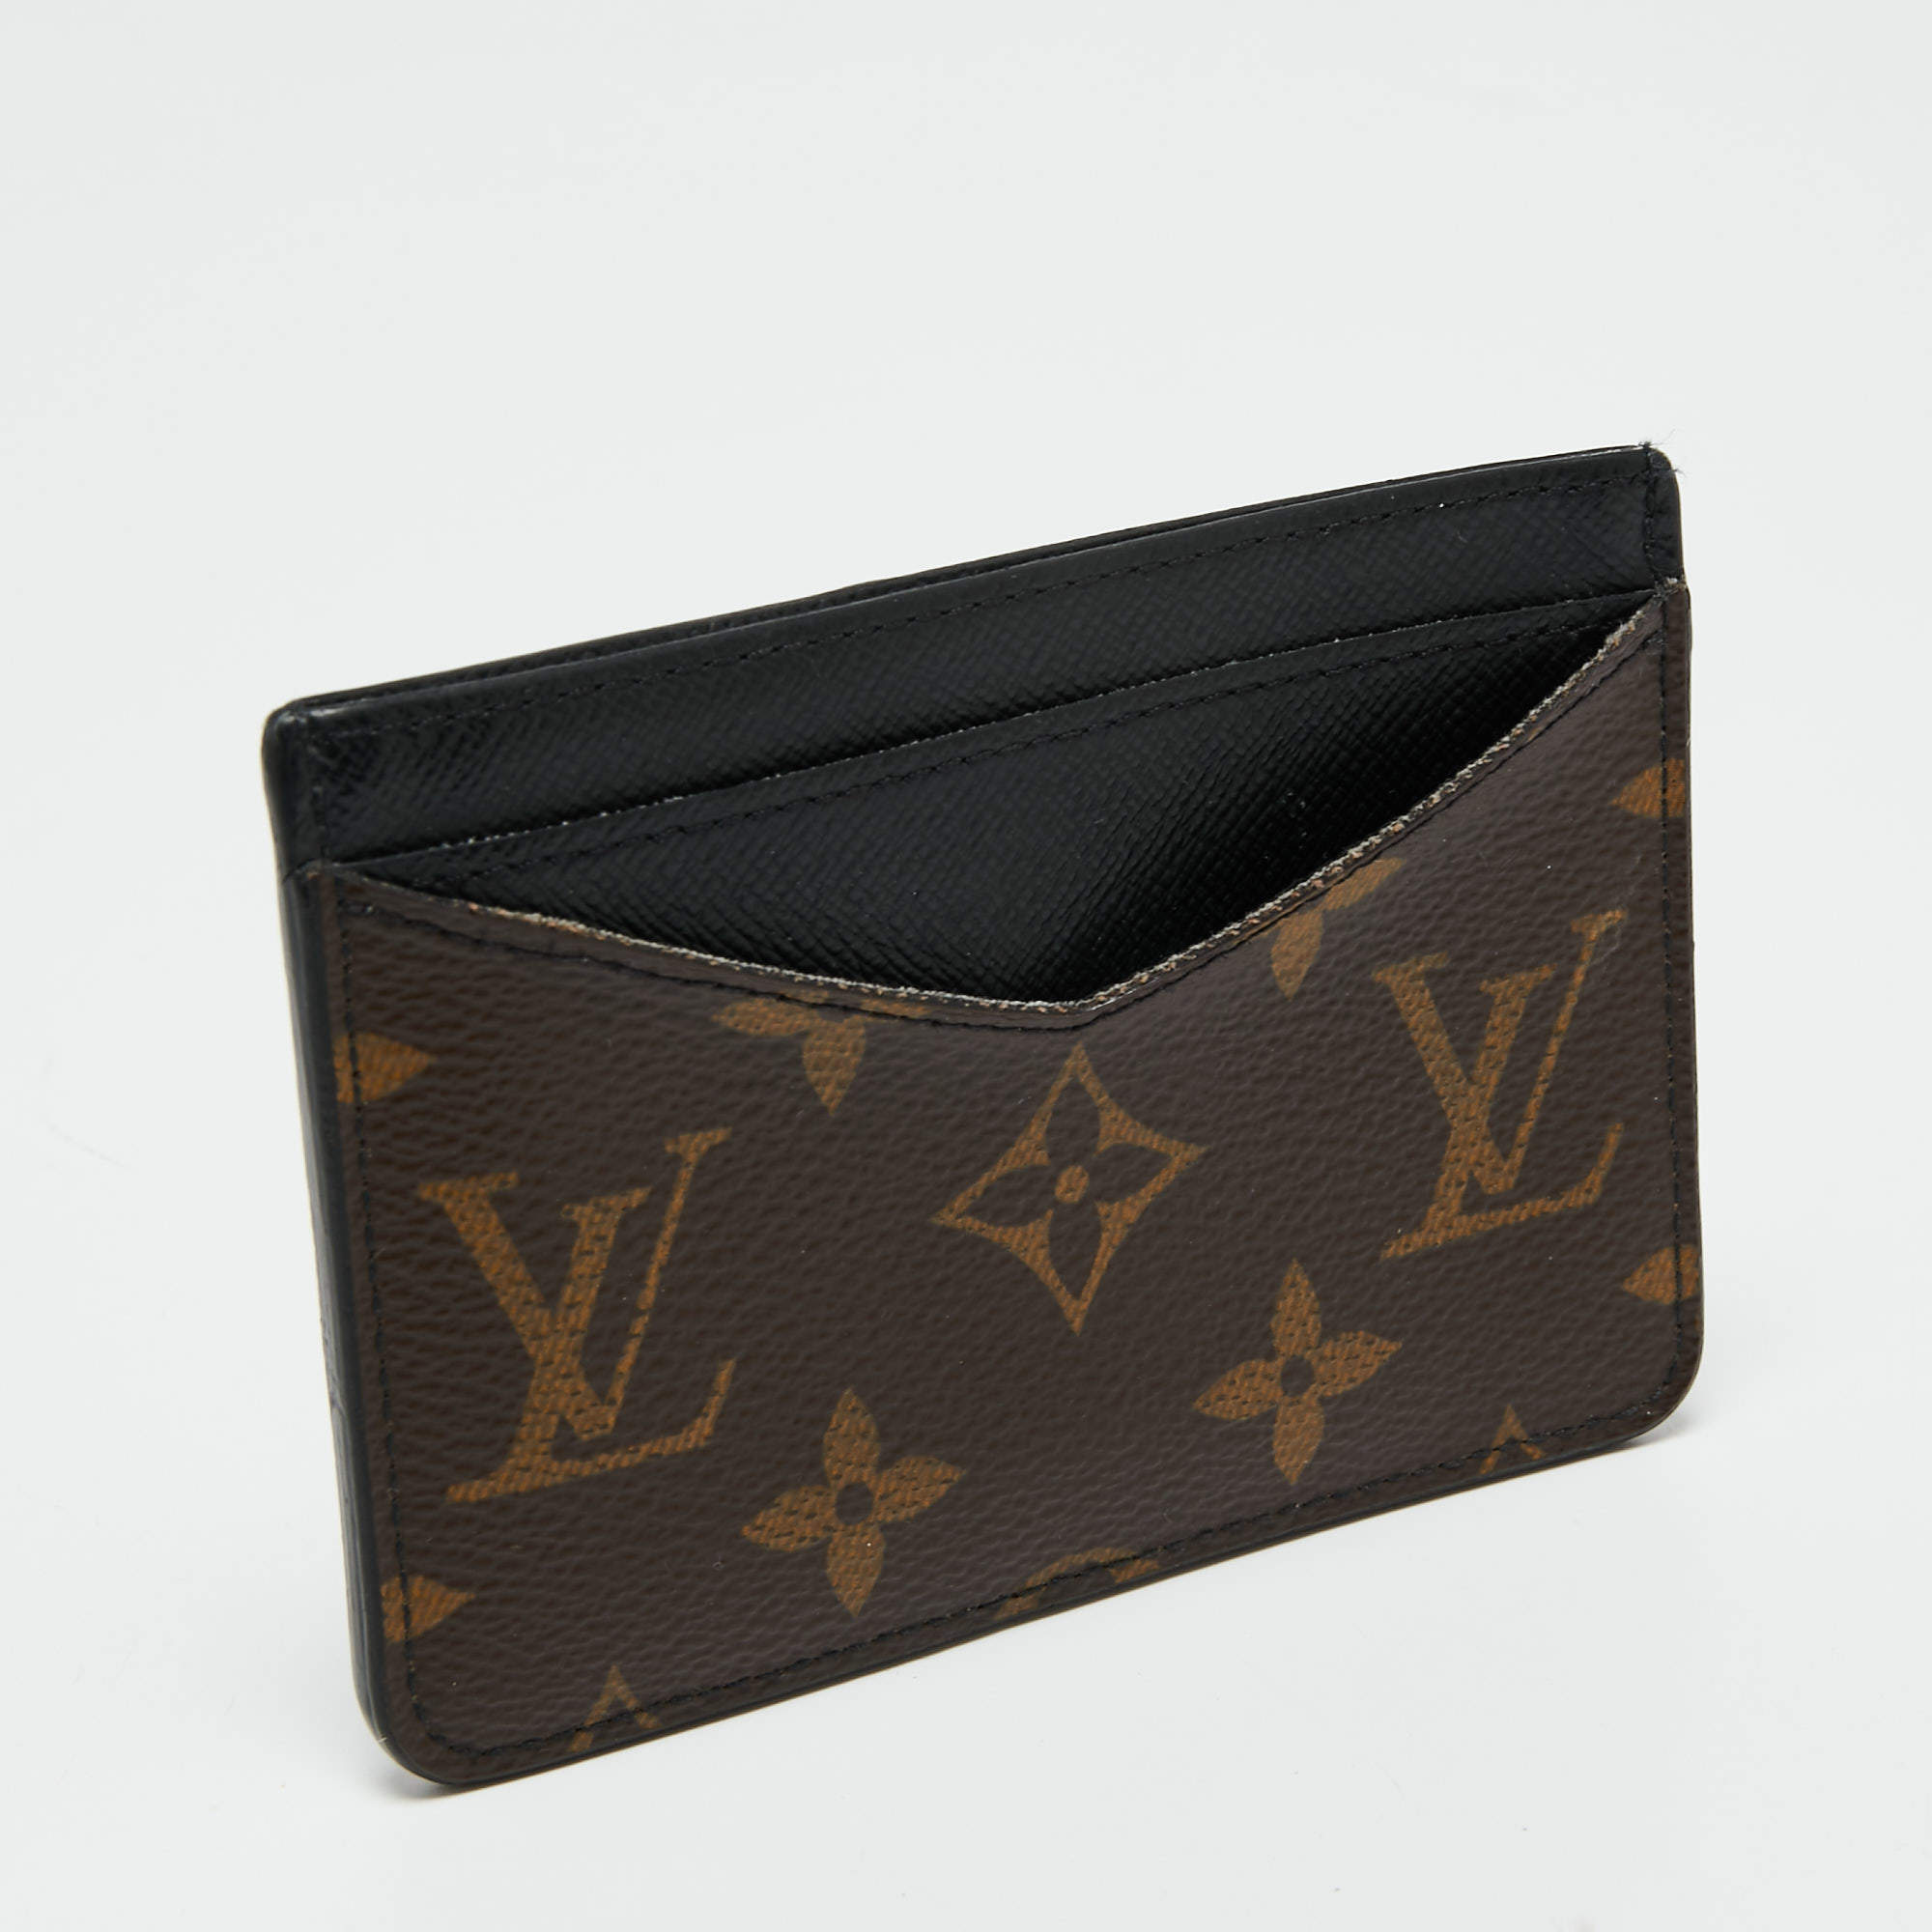 Neo Card Holder Monogram Macassar Canvas in Brown - Small Leather